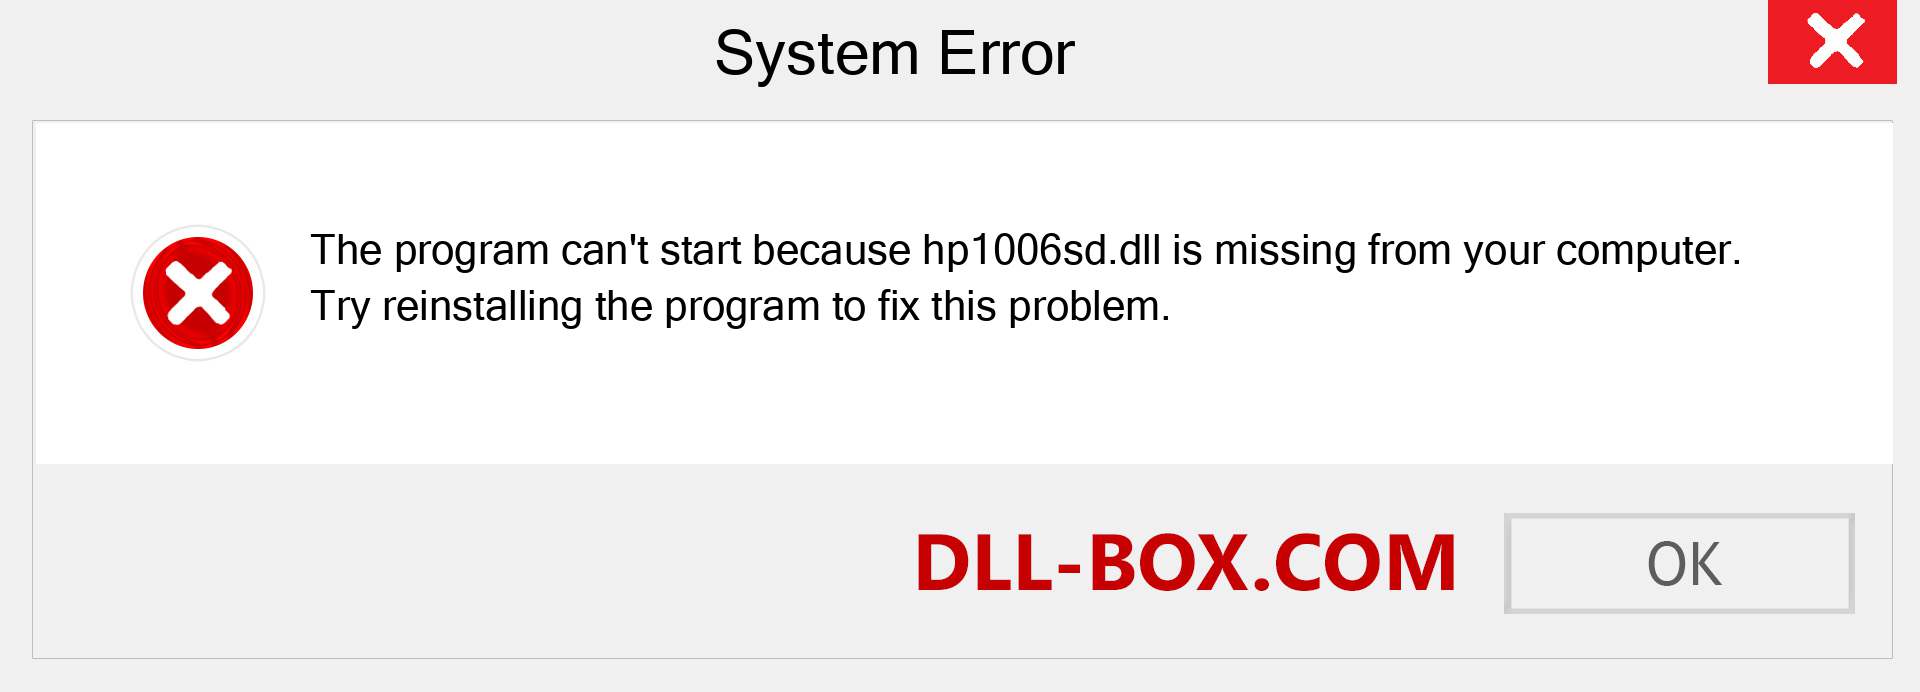  hp1006sd.dll file is missing?. Download for Windows 7, 8, 10 - Fix  hp1006sd dll Missing Error on Windows, photos, images